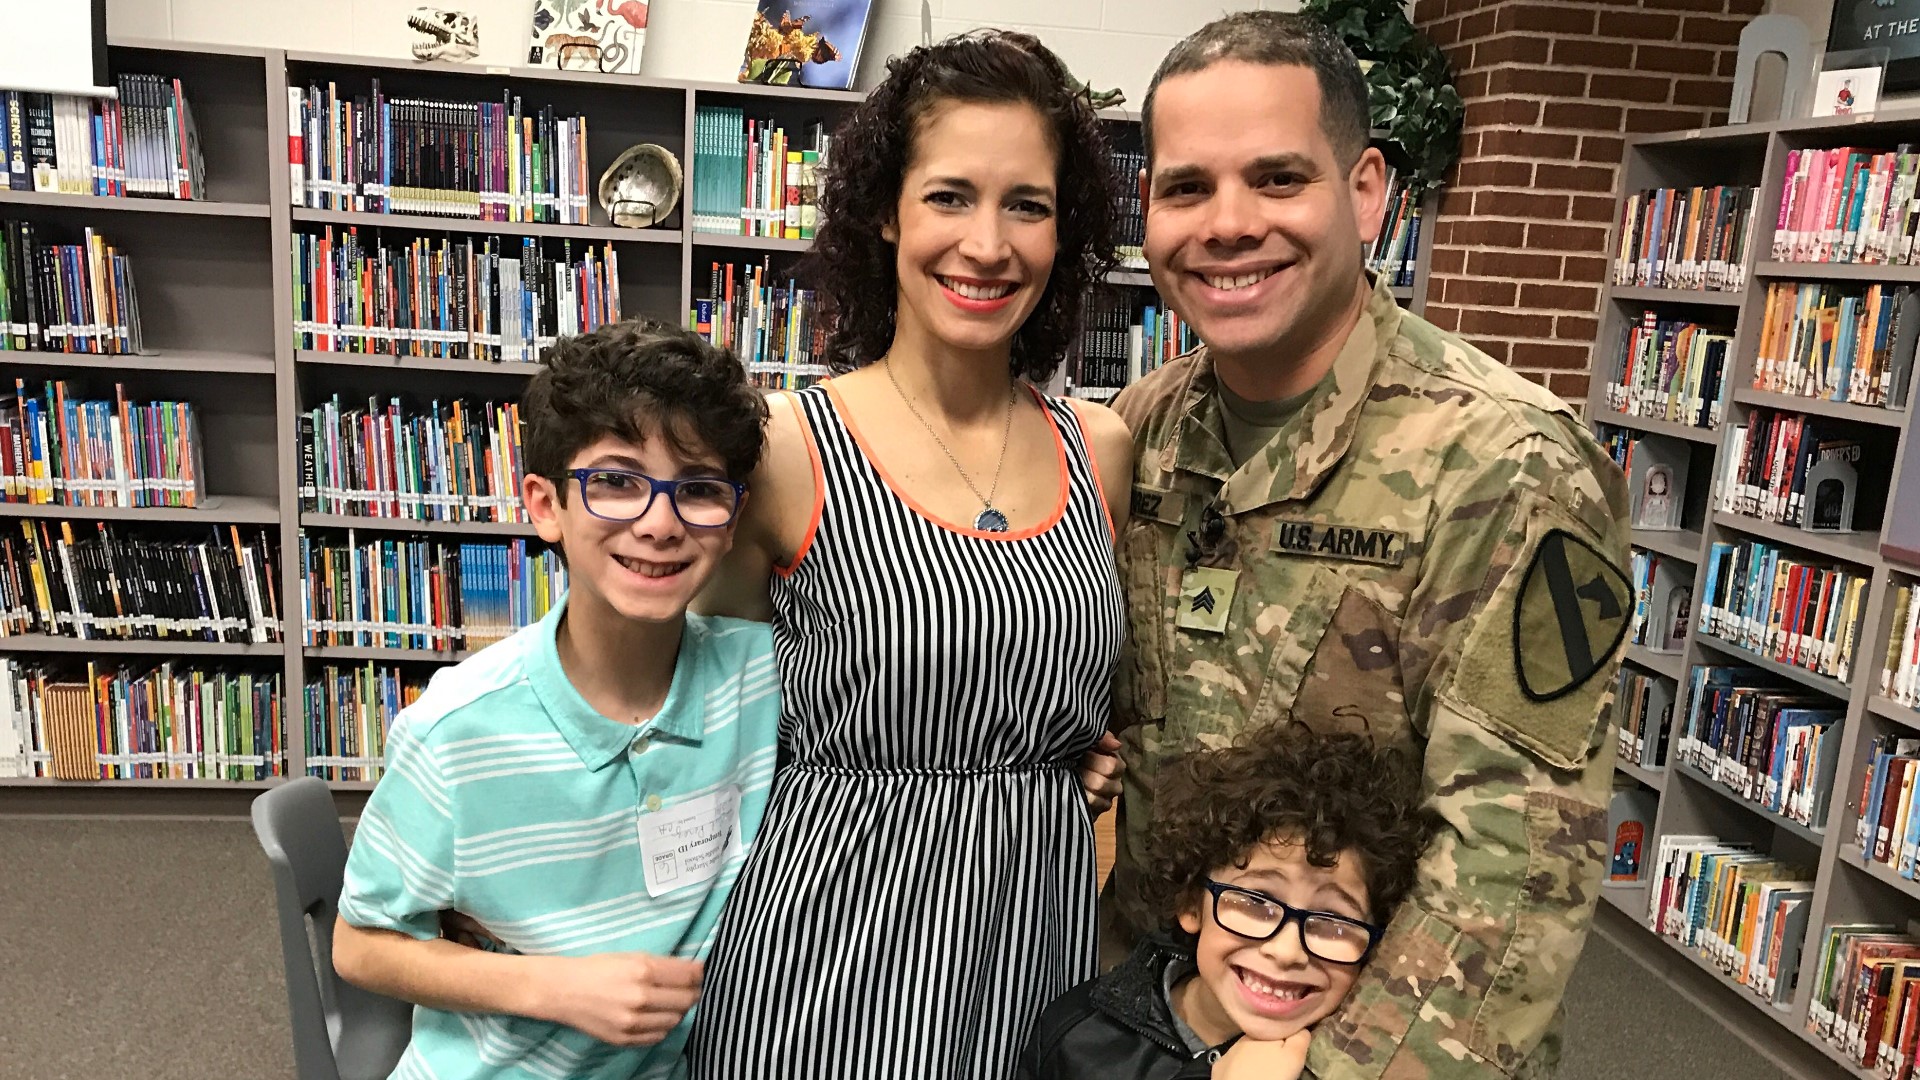 Fort Hood soldier Jonnathan Perez Olivieri was stationed in Germany since last May and had not seen his family for 270 days.